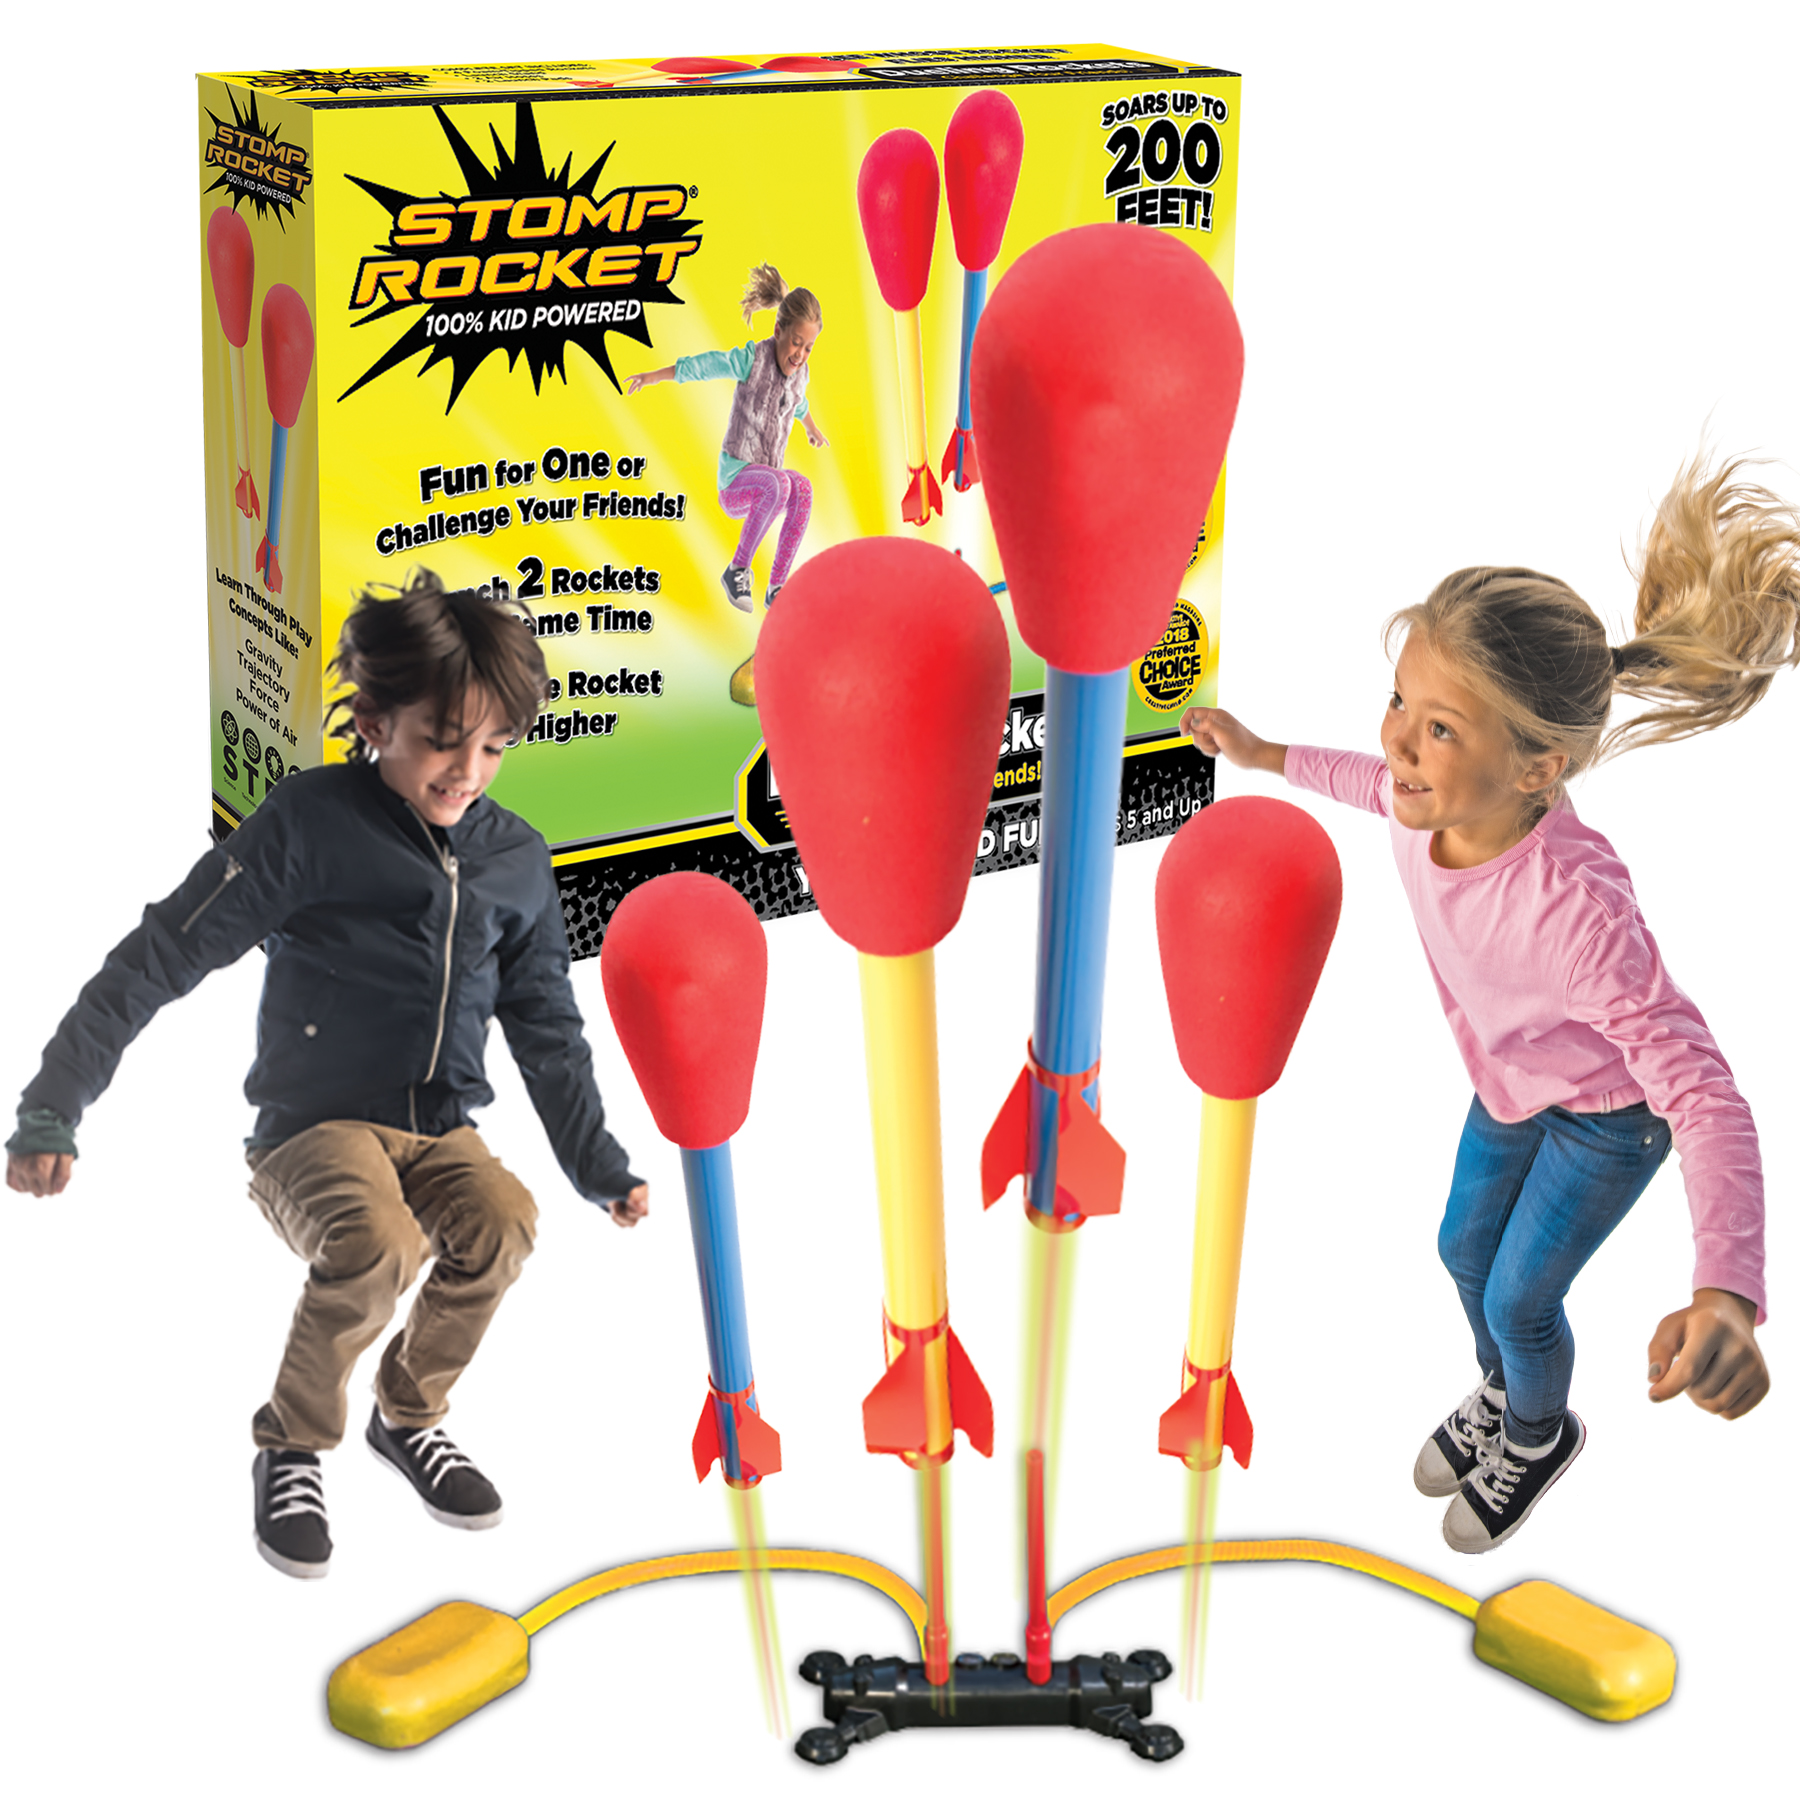 Stomp Rocket Original Dueling Rocket Launcher for Kids - SOARS 200 FEET - 4 Rockets and Multi-Player Adjustable Launcher Stand - Fun Outdoor Toy and Gift - Boys or Girls Age 5+ Years Old - image 1 of 6